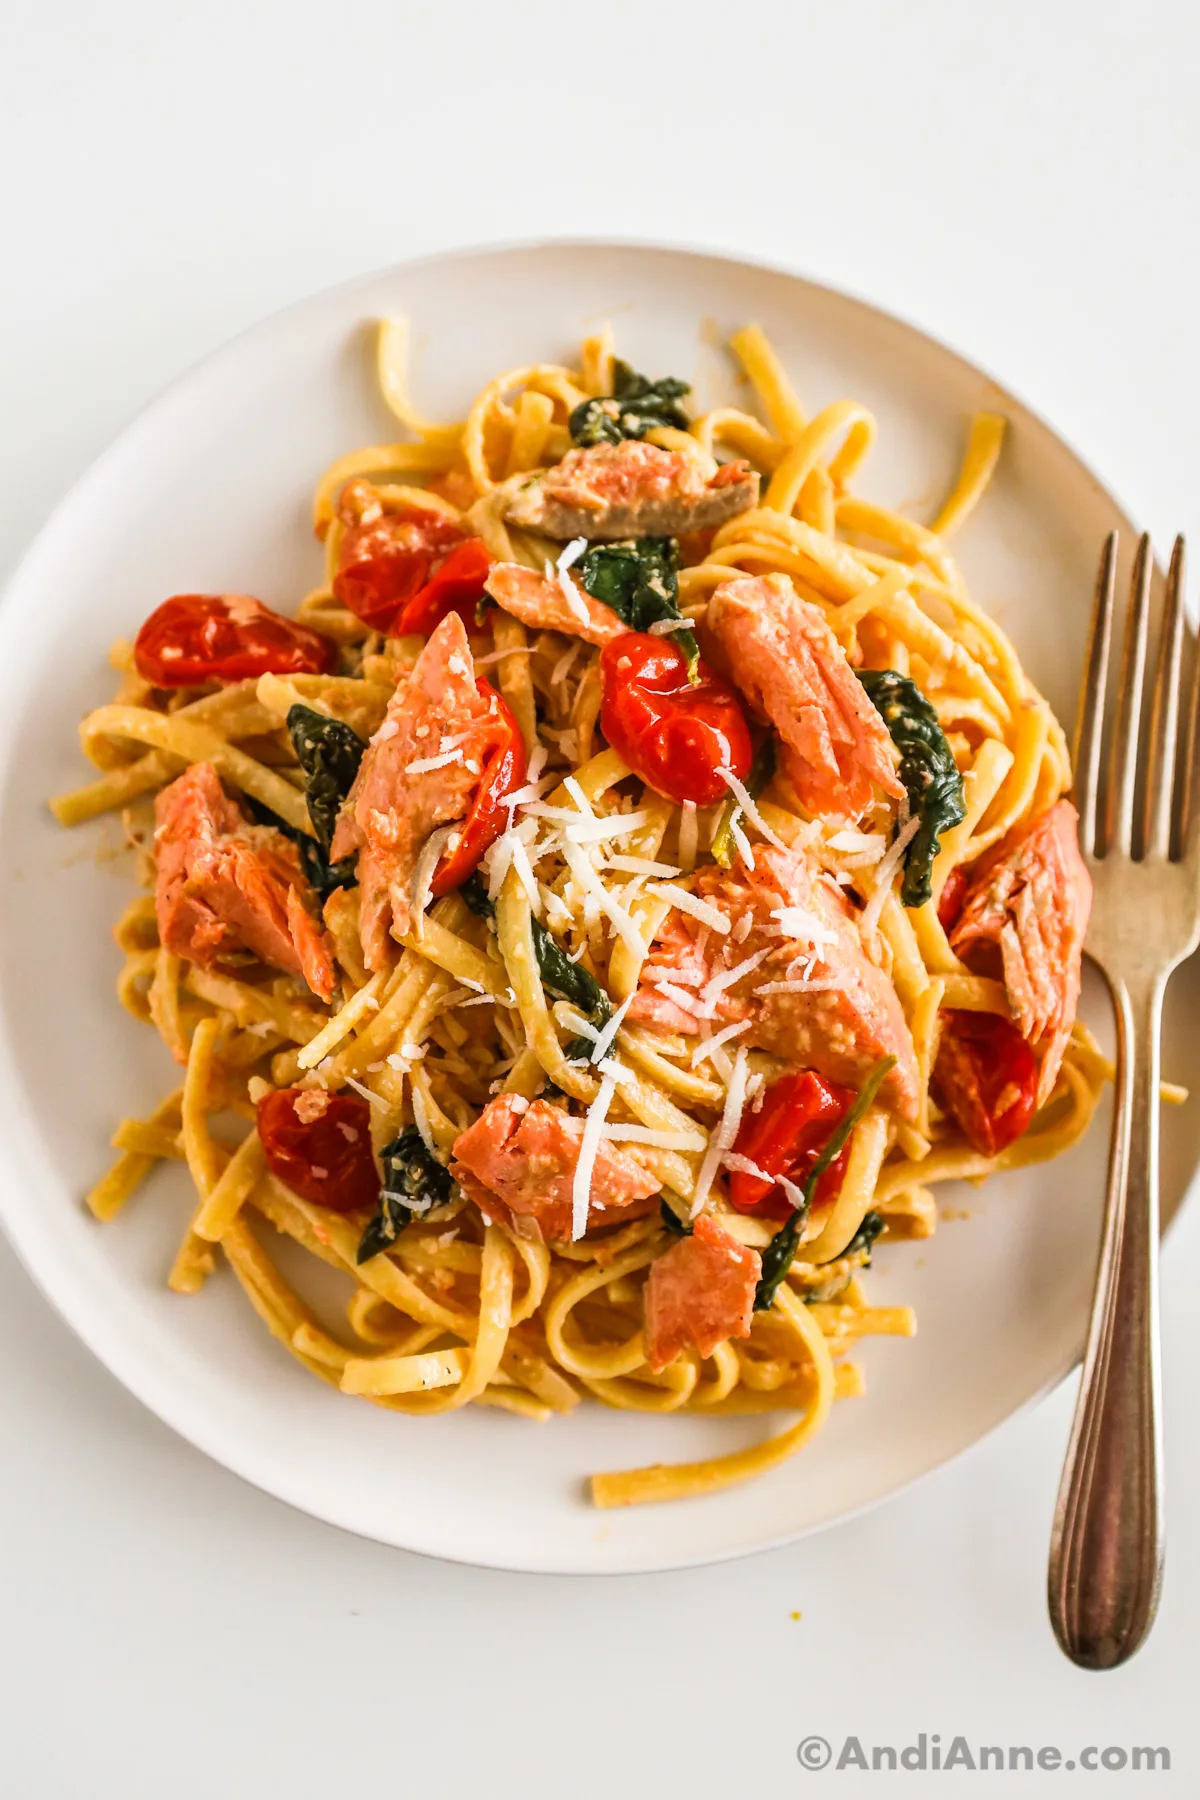 Pasta noodles, salmon, grape tomatoes and spinach with grated parmesan on top. All on a white plate with a fork.